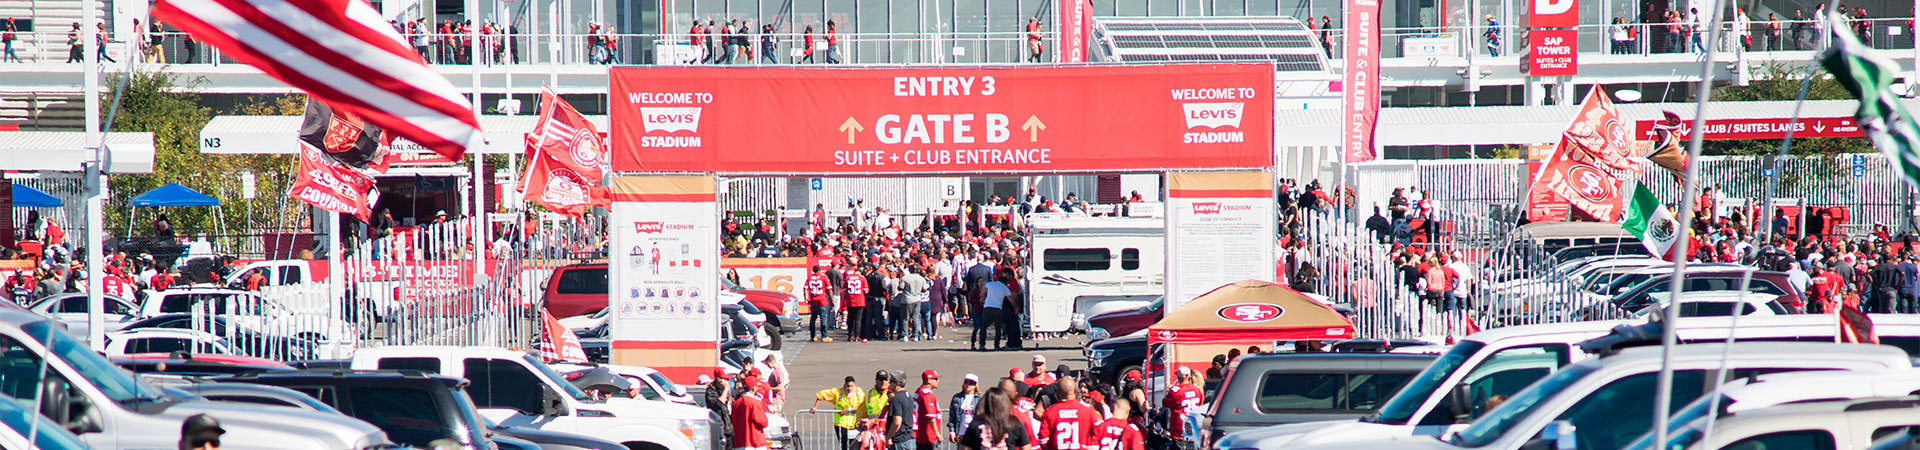 Event truss as entrance gates outside of Levis Stadium.